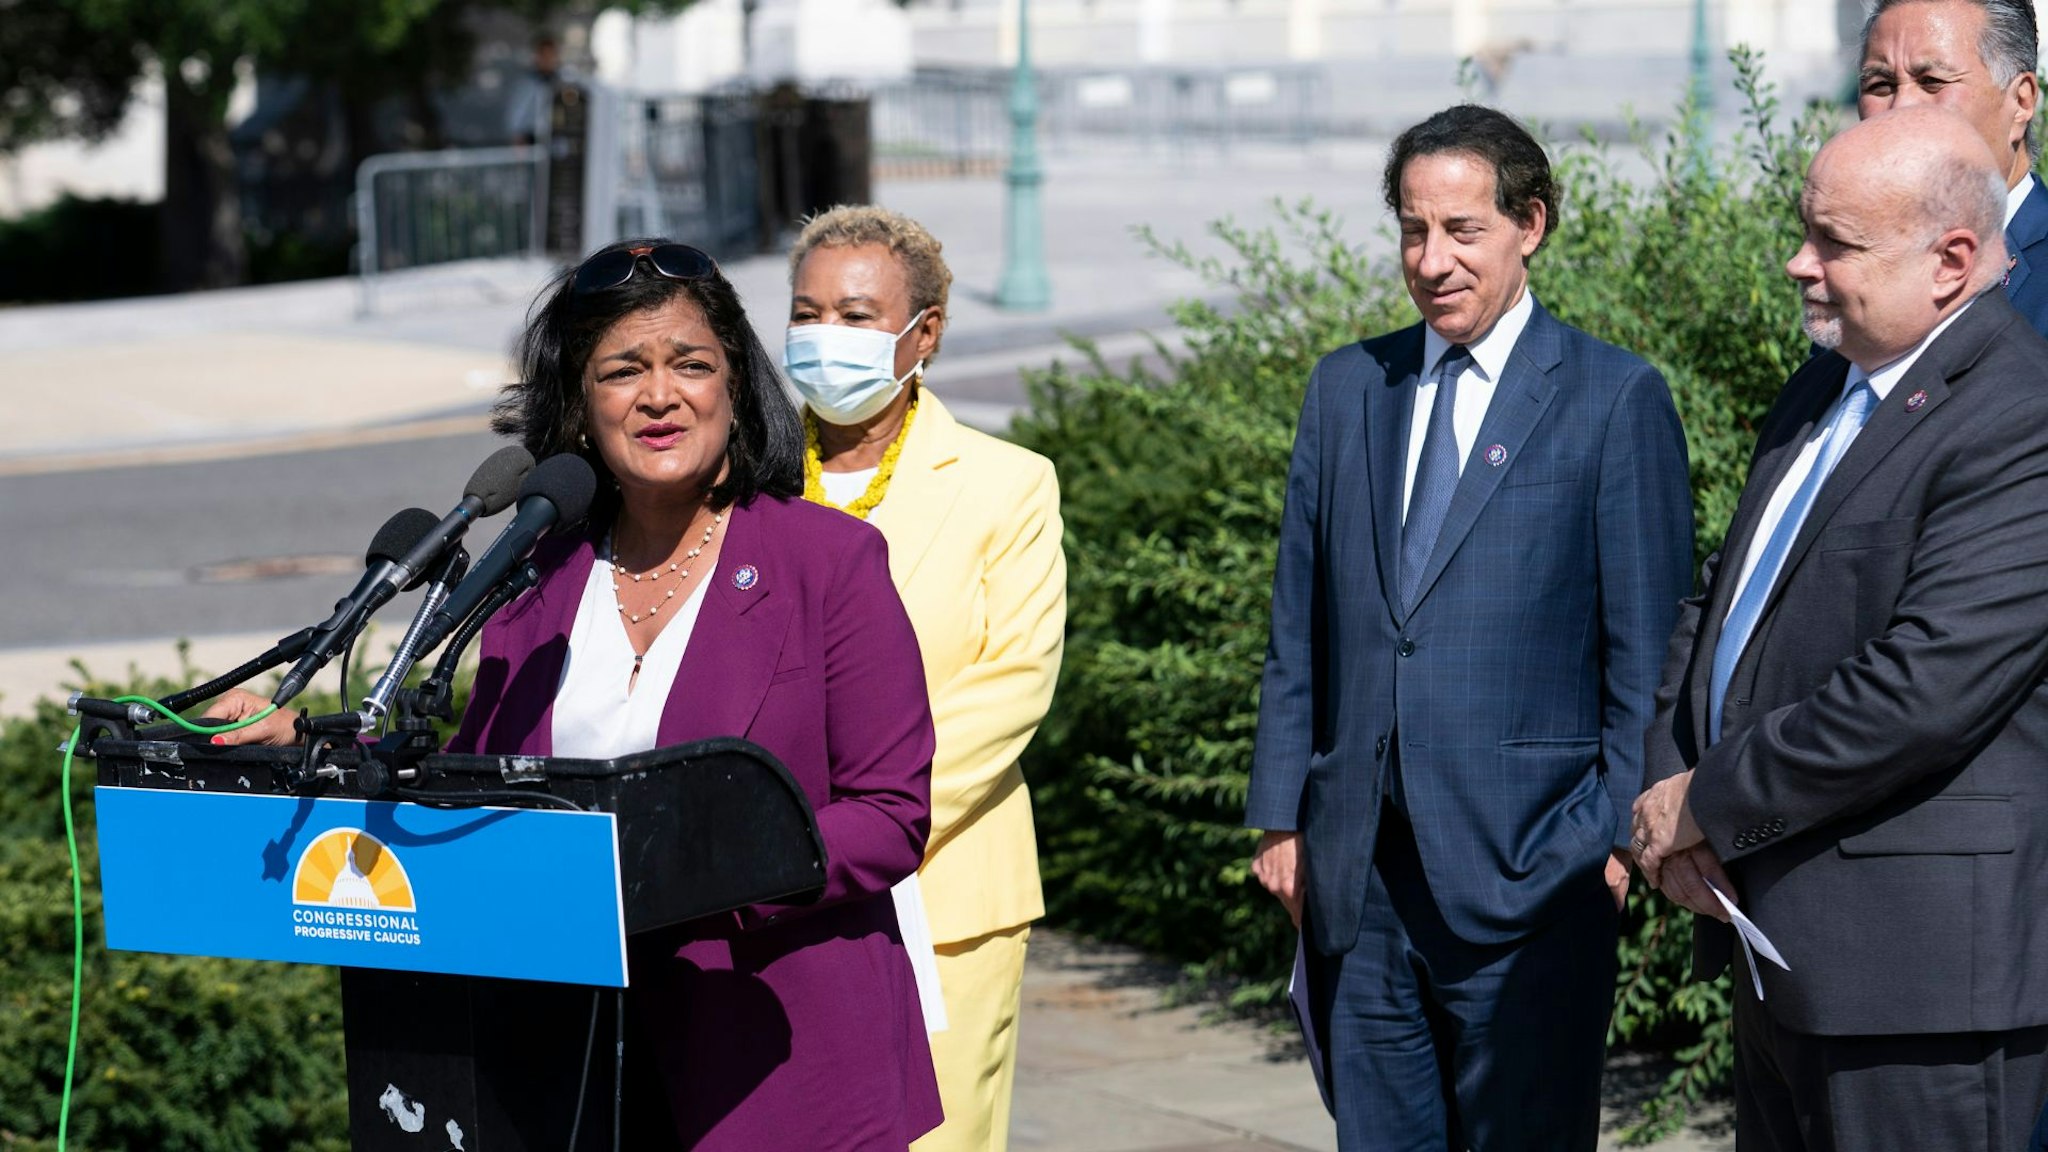 WASHINGTON, UNITED STATES - AUG 12: Rep. Pramila Jayapal, D-WA, Congressional Progressive Caucus Chair, speaks during a news conference on the Inflation Reduction Act outside of the U.S. Capitol in Washington, D.C., on Friday Aug. 12, 2022.